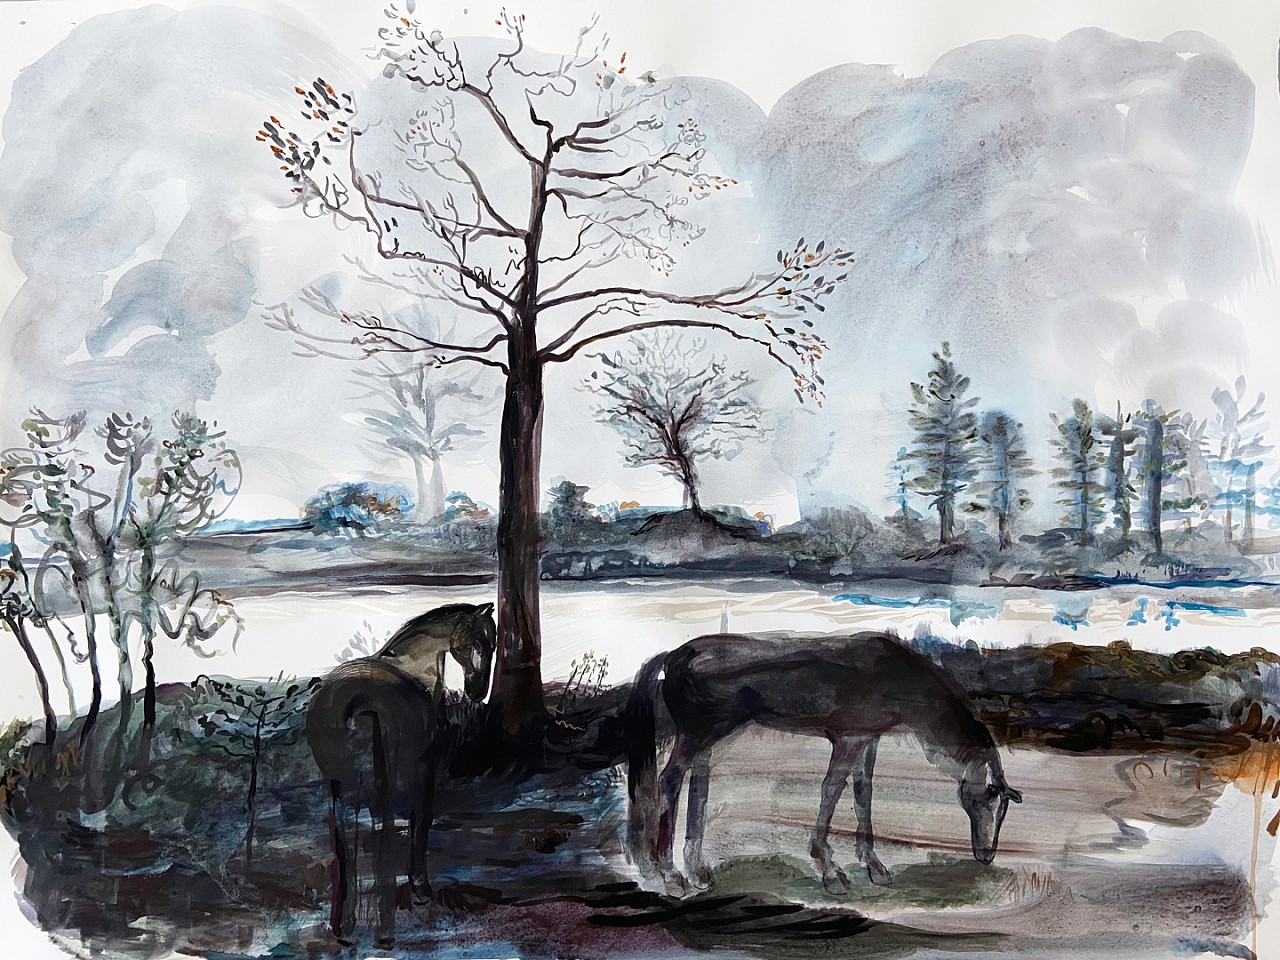 Suzy Spence
Fading Landscape (2 Mares on the Winooski), 2022
SPENC313
flashe on paper, 22 x 30 inches / 25 1/4 x 33 1/4 inches framed